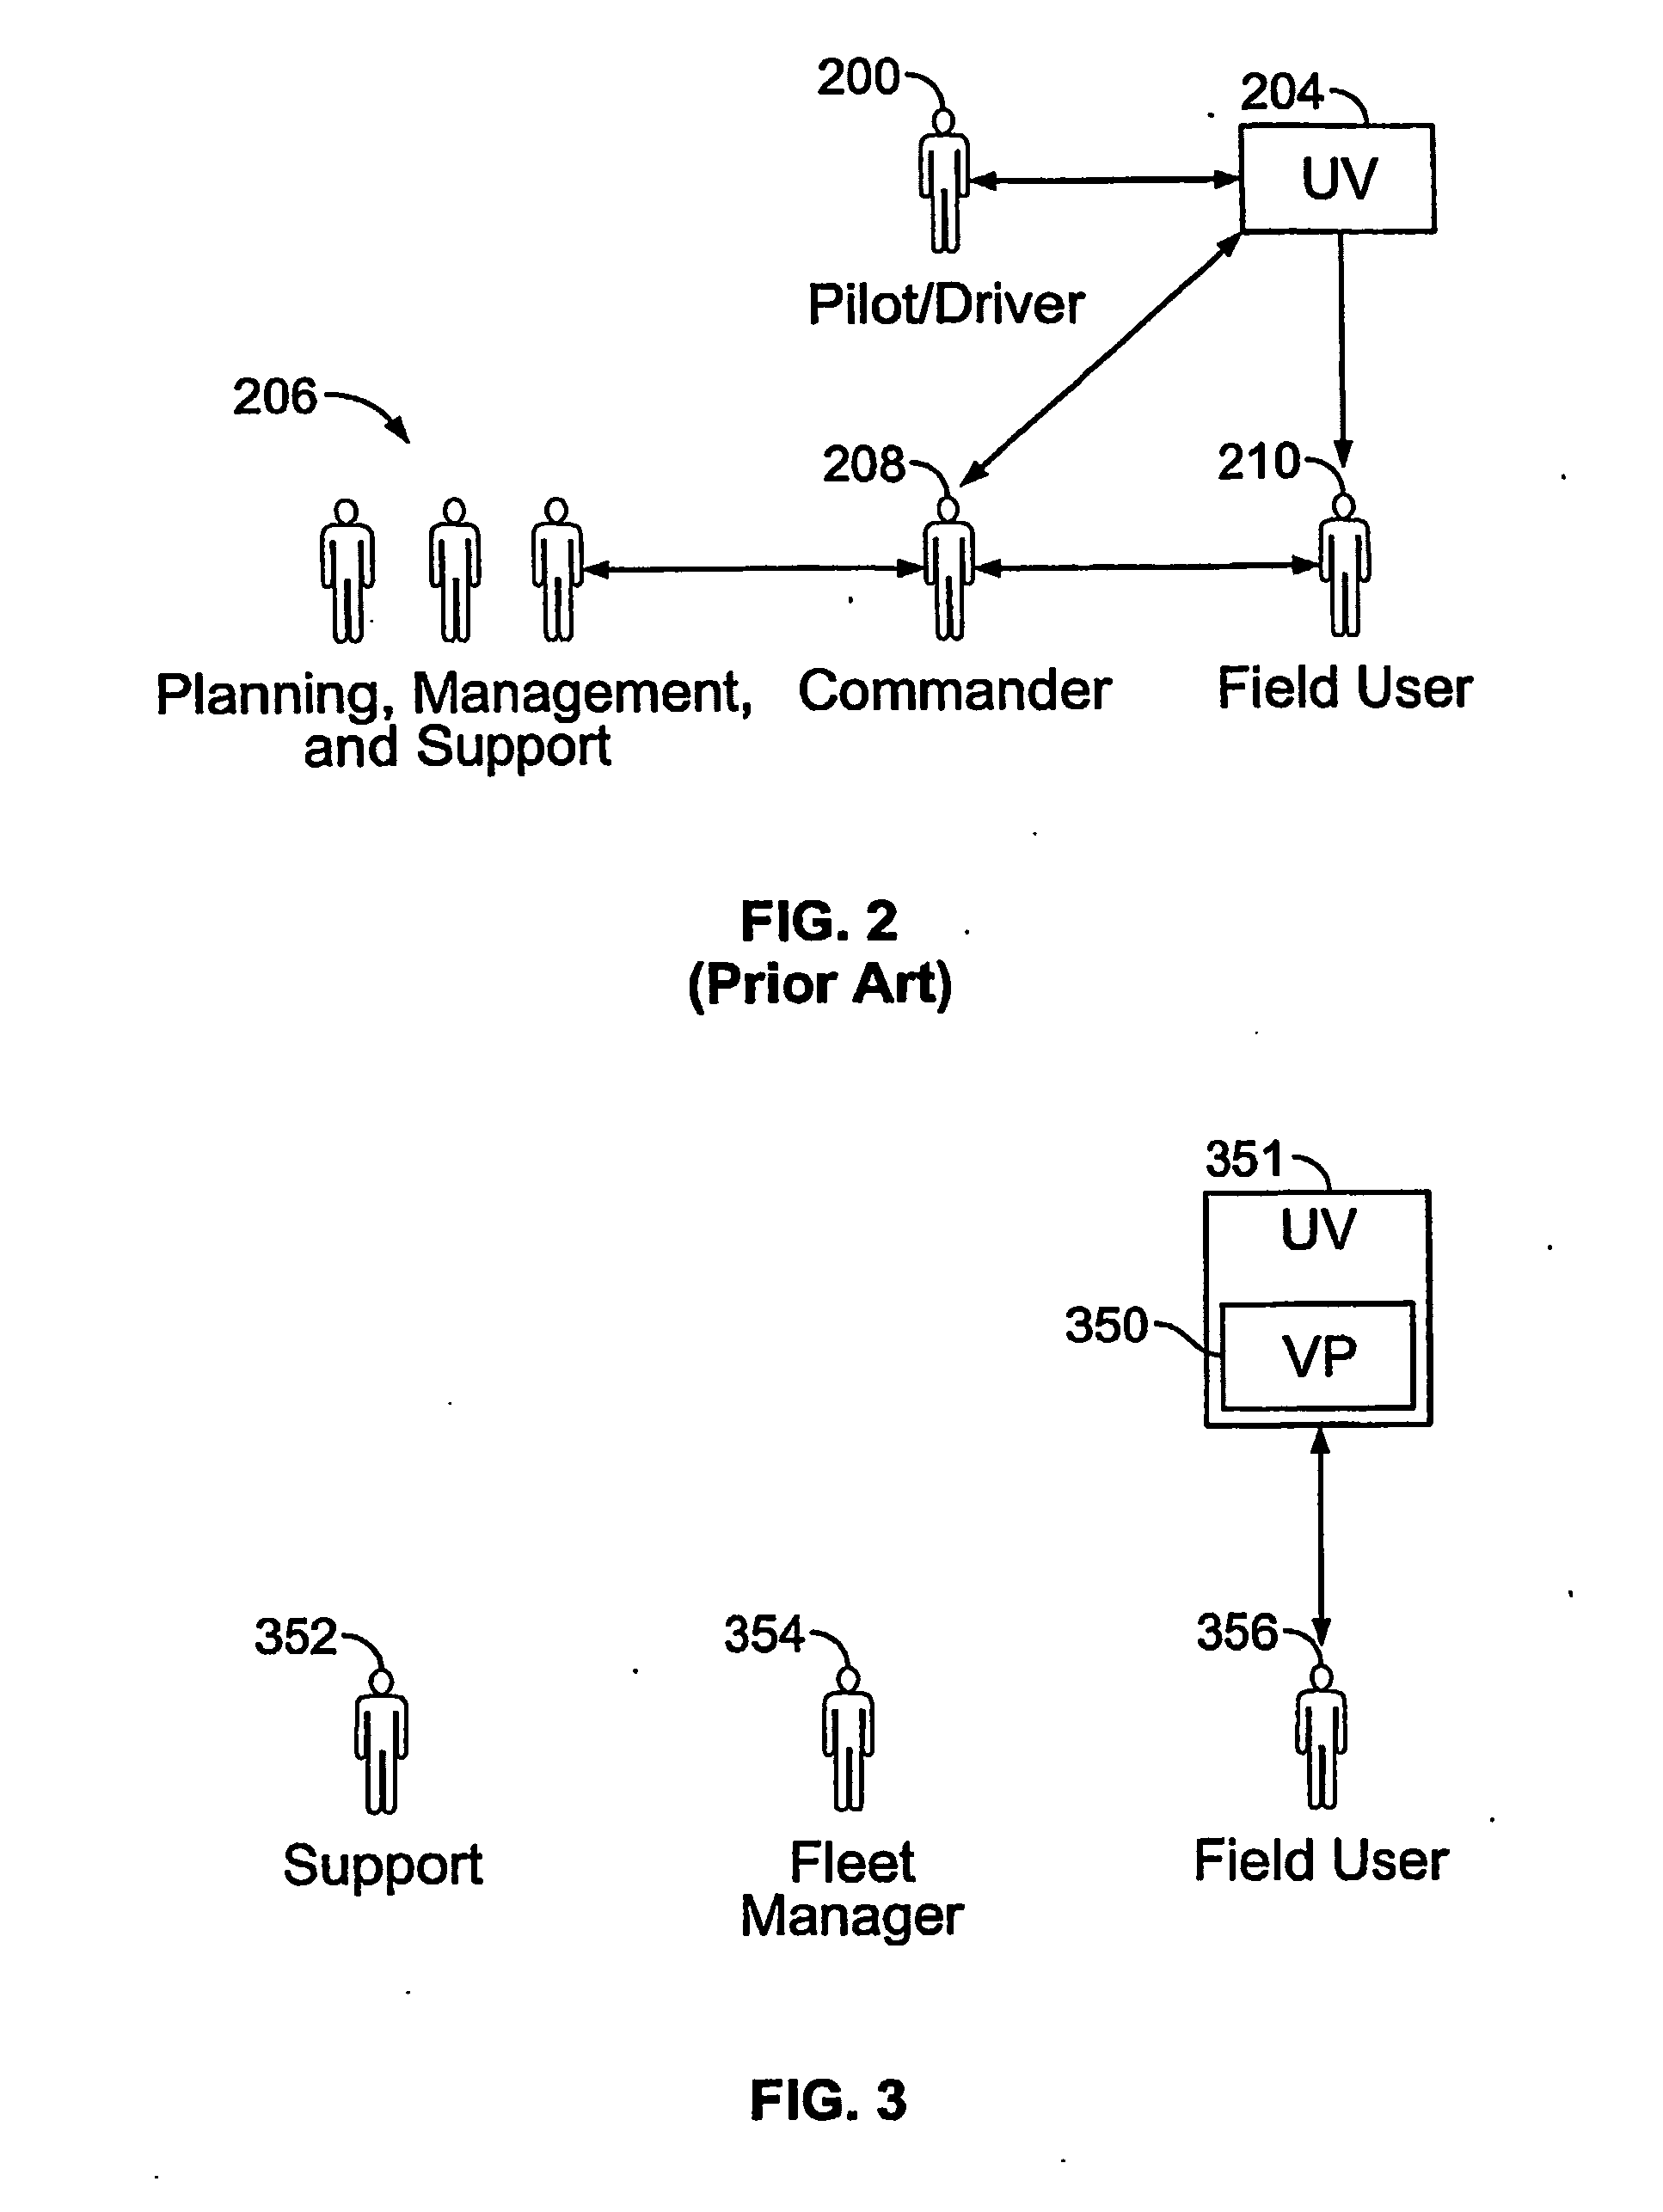 Methods and apparatus for unmanned vehicle command, control, and communication